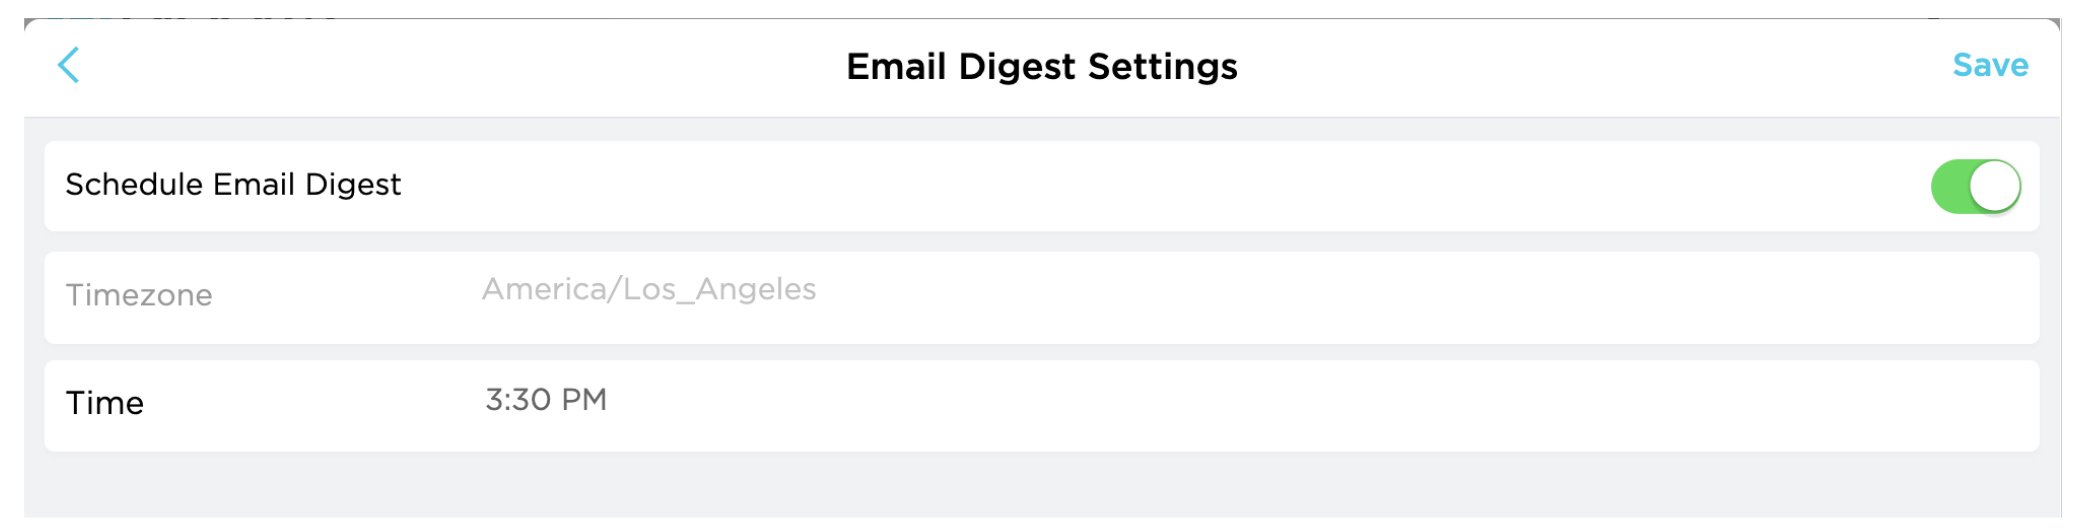 email-digest-settings